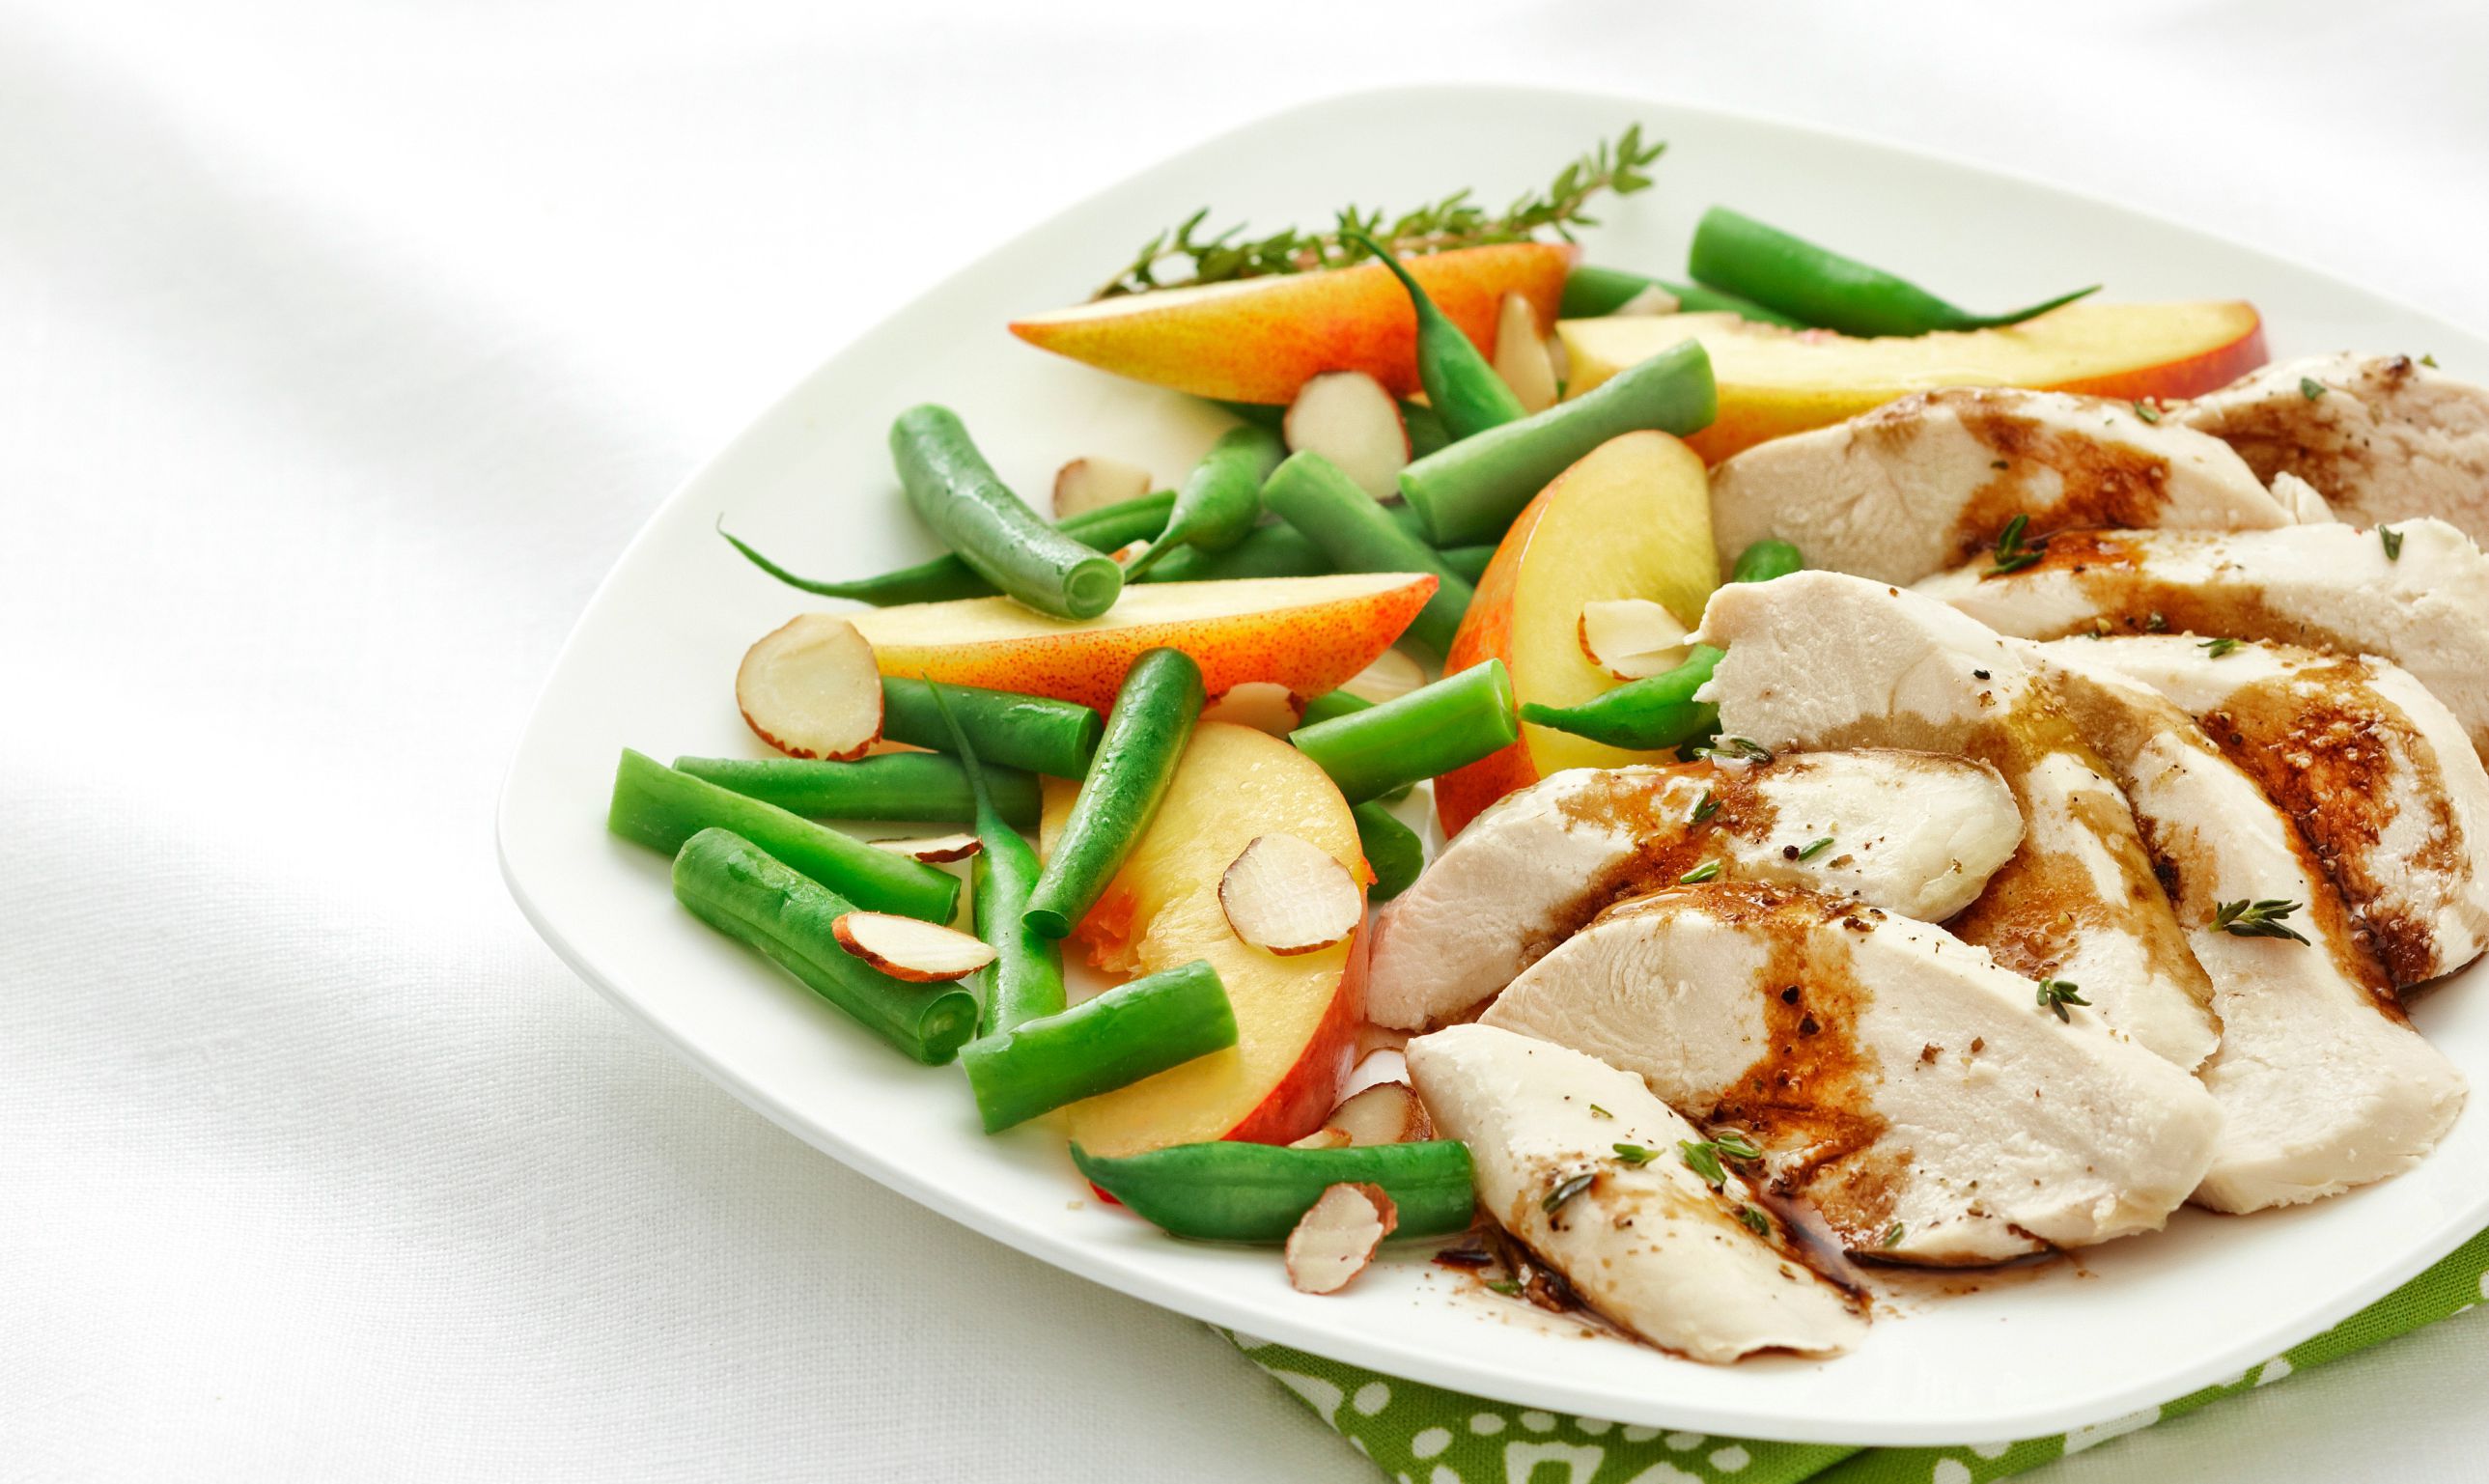 Low-Fat Meals for Dinner: Tips and Recipes